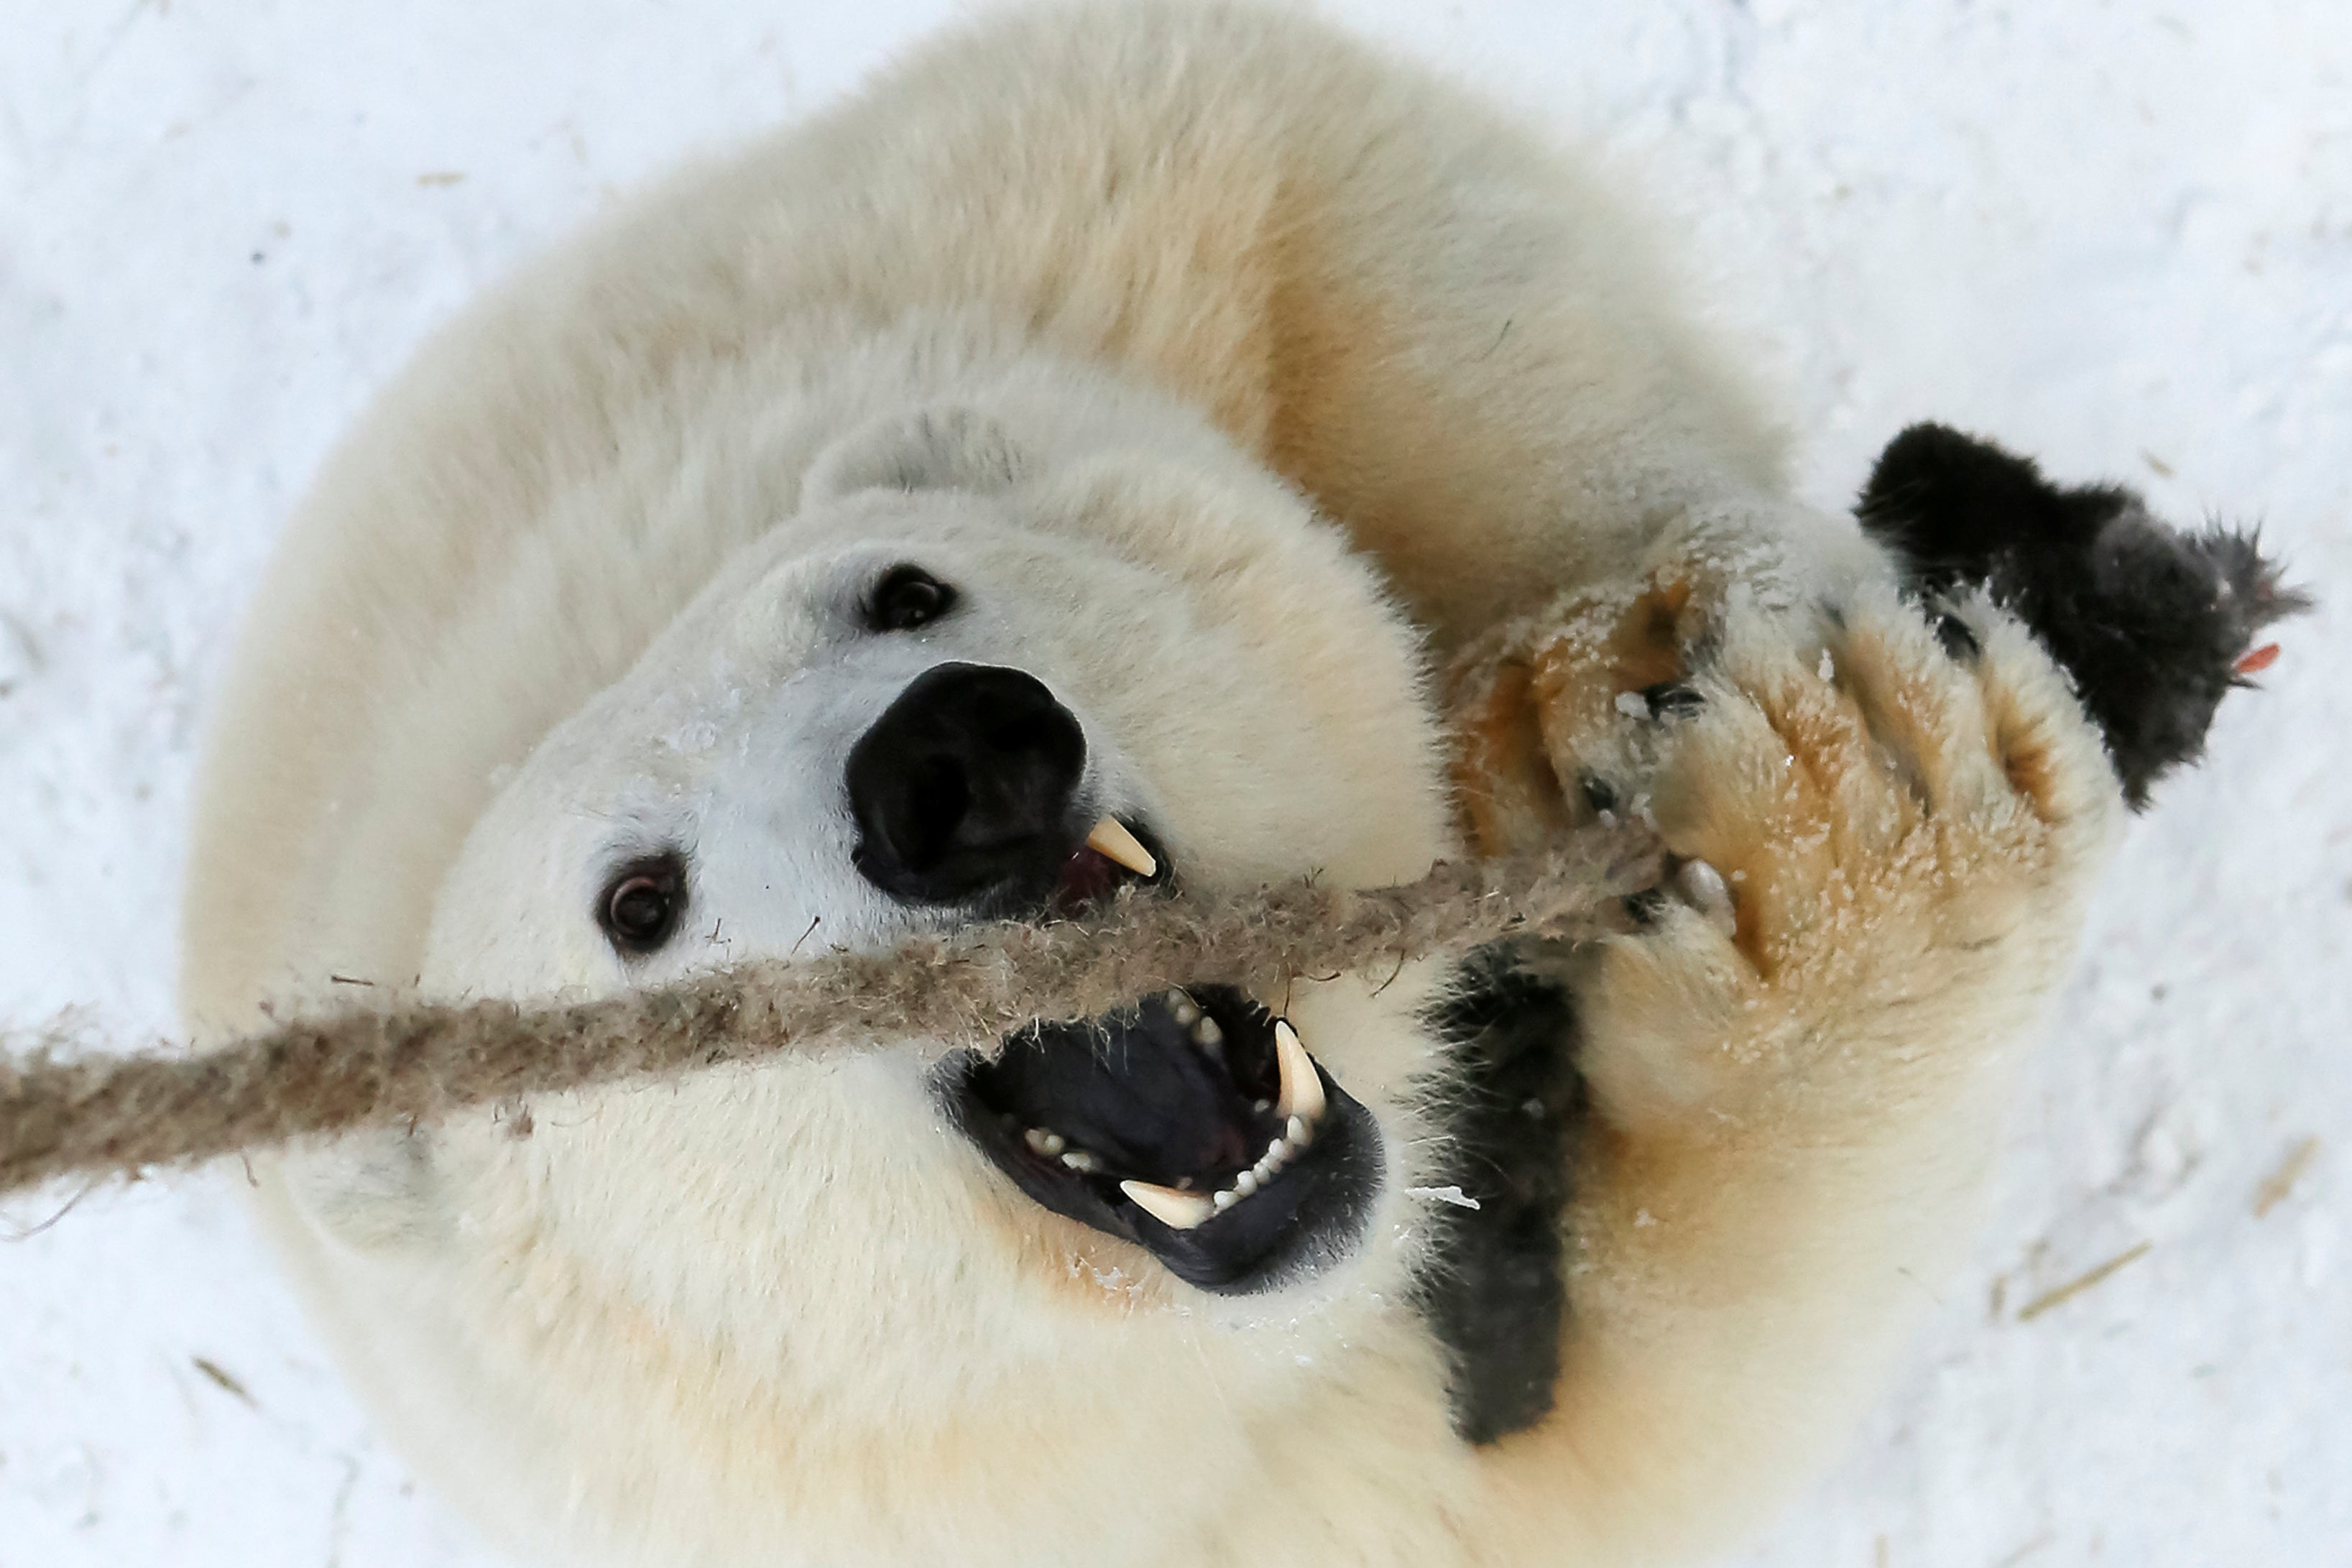 polar bear chewing on a rope, also looking terrifying